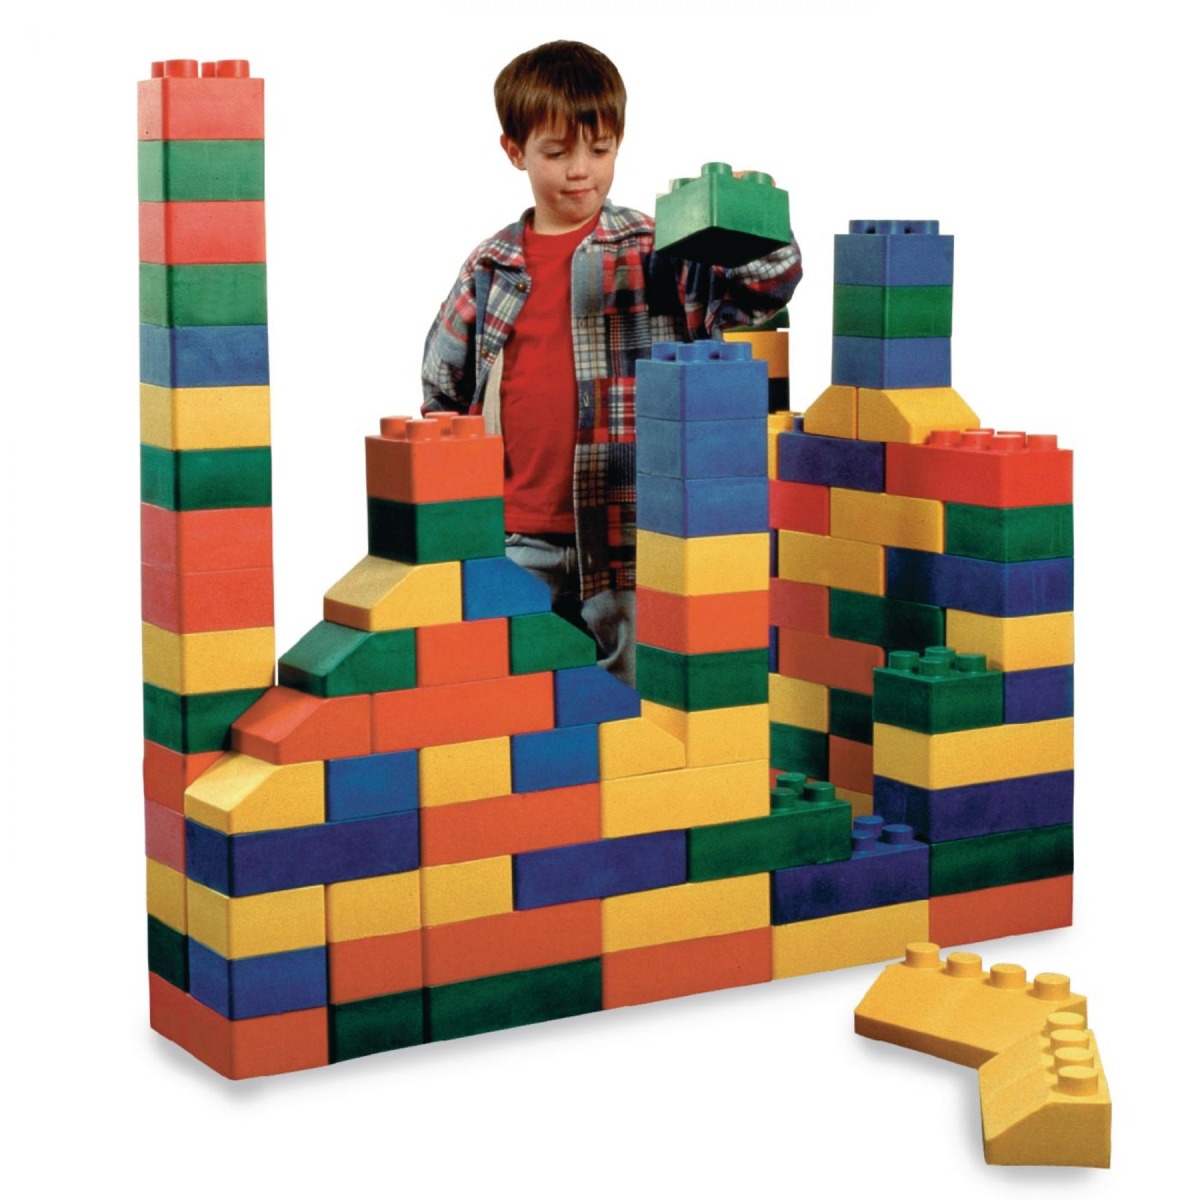 Child stacking green block on top of tower of colorful Edu-Blocks in variety of shapes